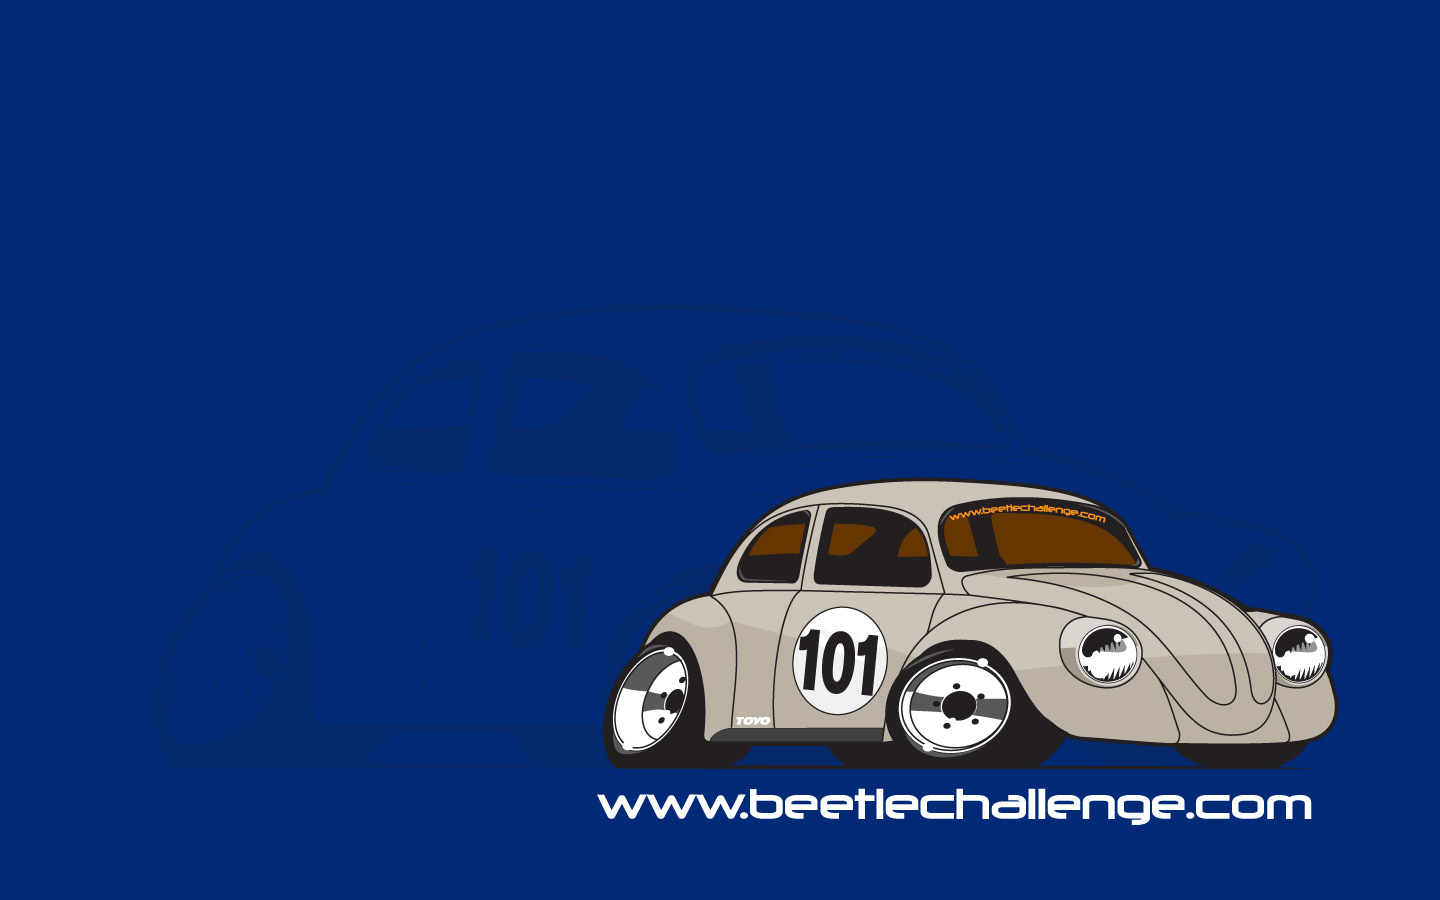 The Official Beetle Challenge Website Aircooled Vw Circuit Racing In